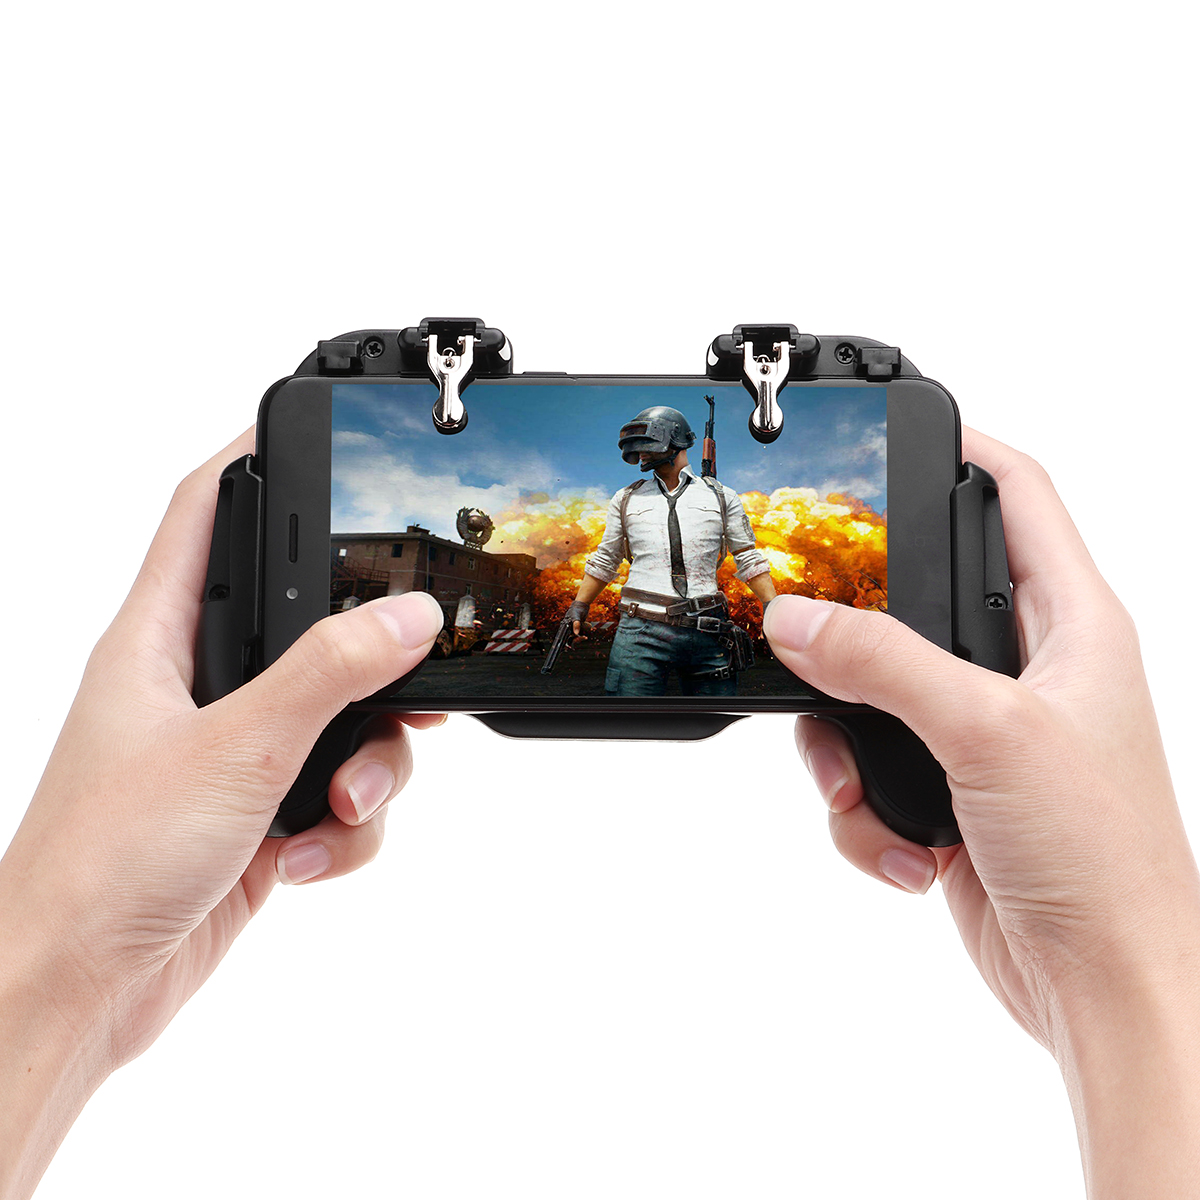 

H5 Gamepad Joystick Game Controller USB Built-in Cooling Fan for PUBG Rules of Survival Mobile Game Fire Trigger for Phone